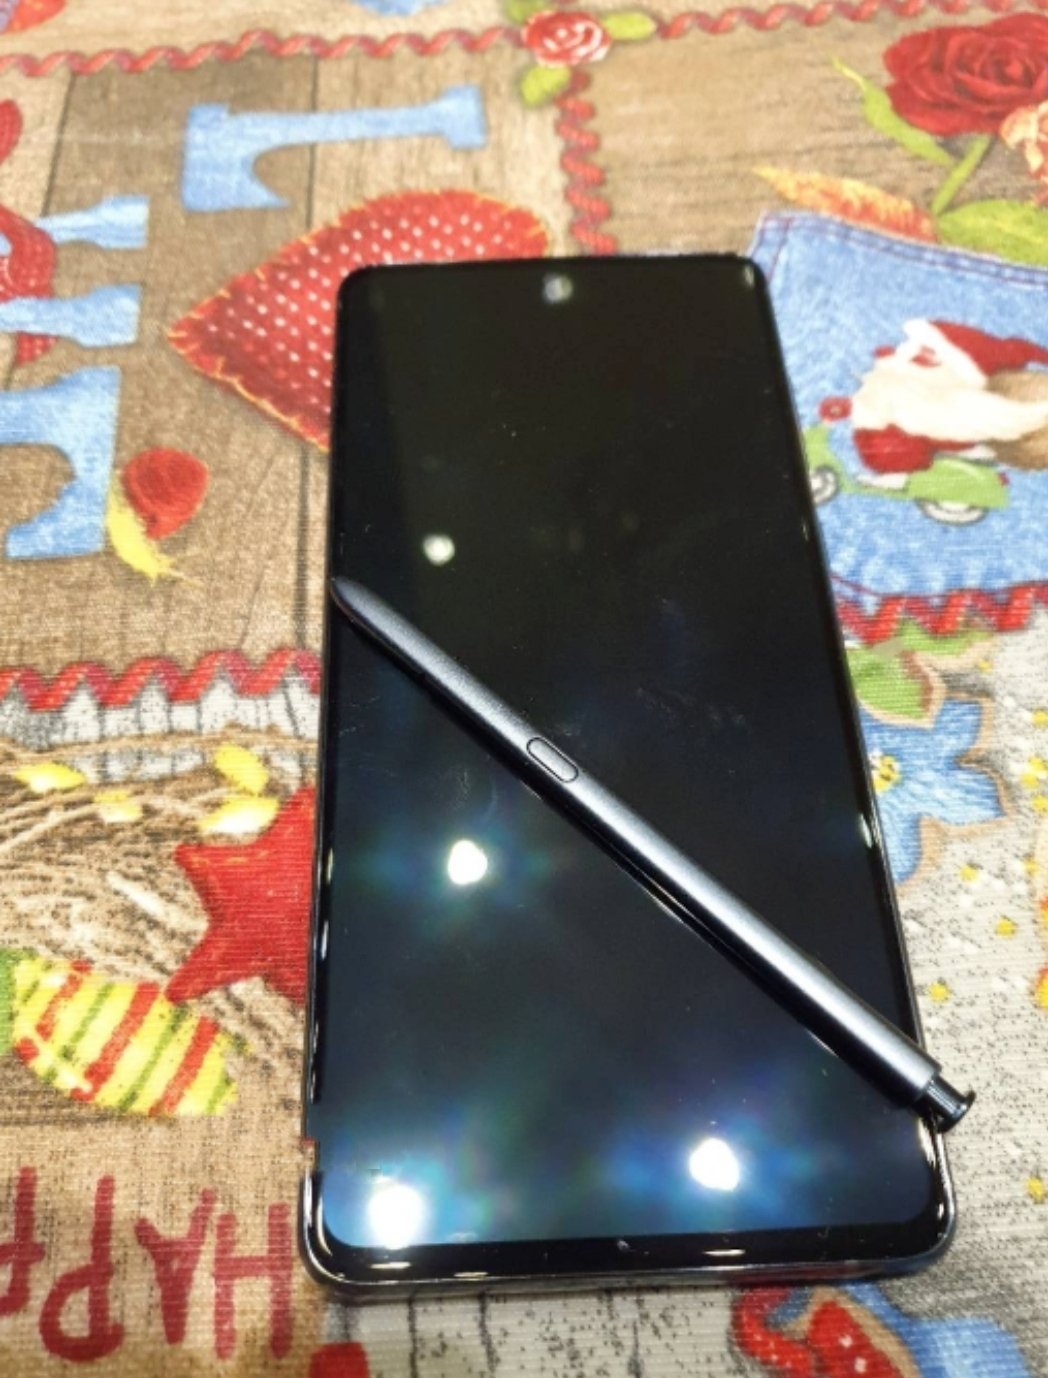 Samsung Galaxy Note 10 Lite: A Note for everyone